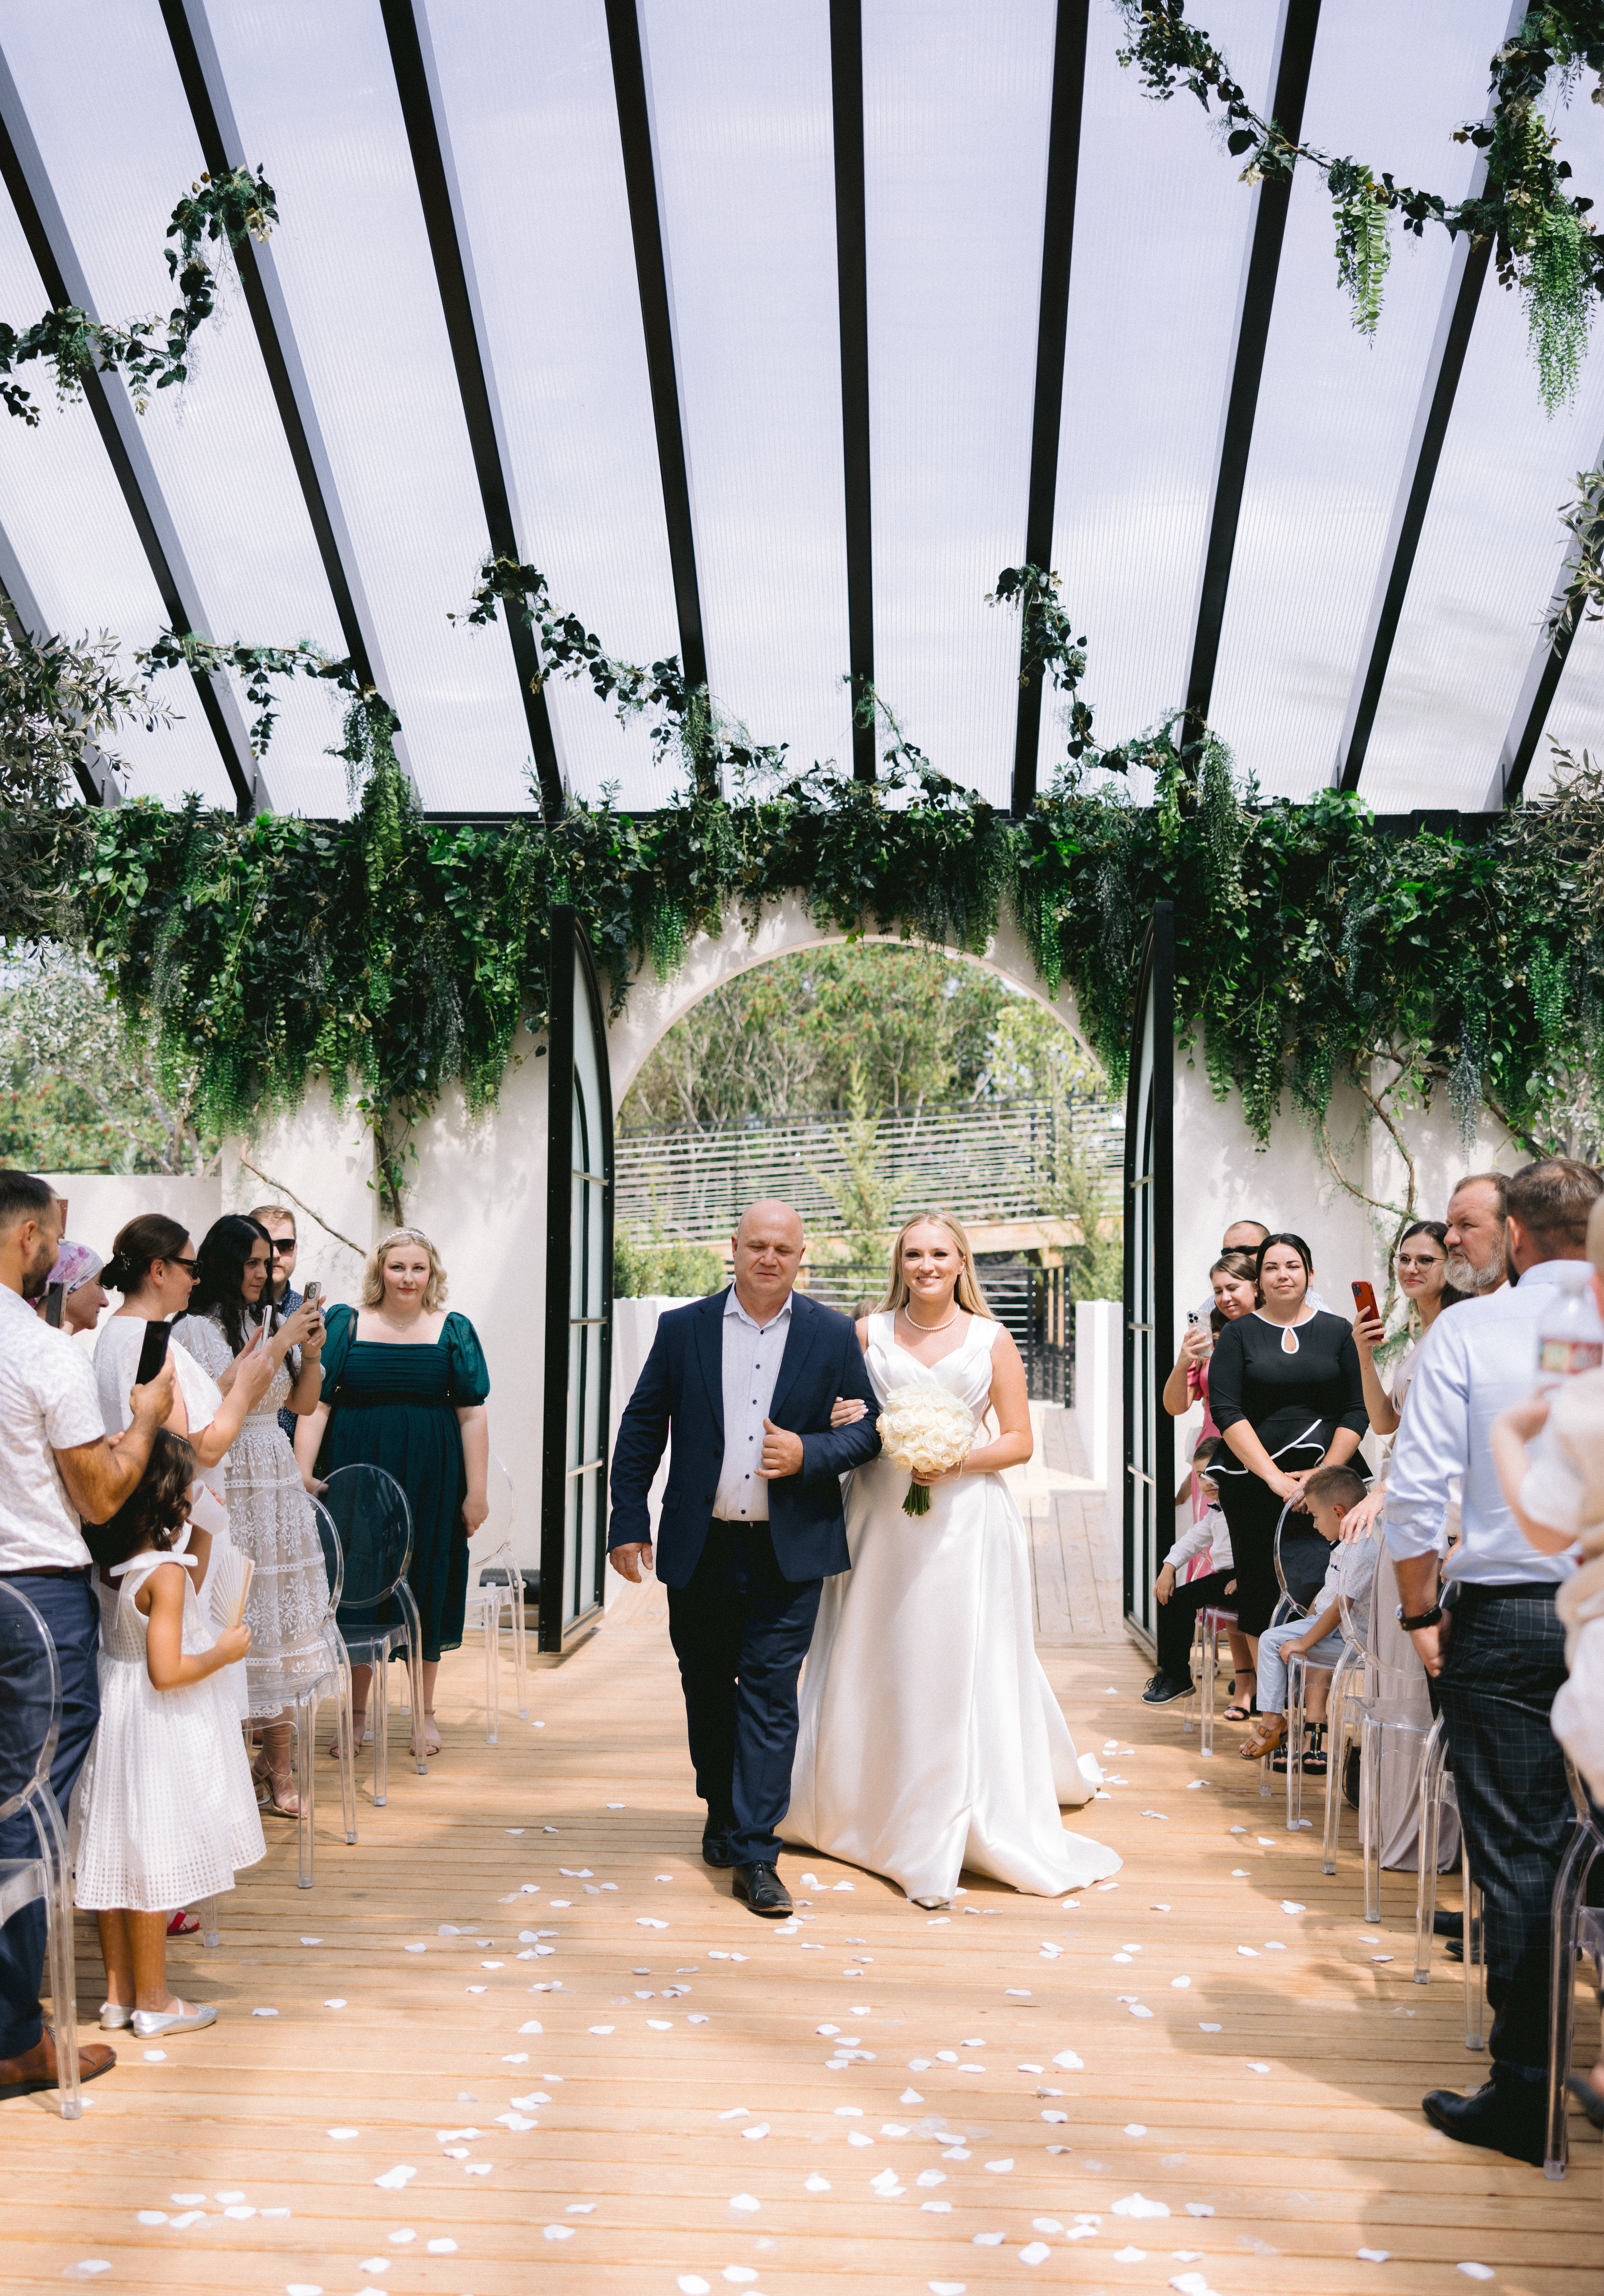 Father of bride walking bride down the isle at Greenhouse Two rivers shot by Tatyana Zadorin Photography